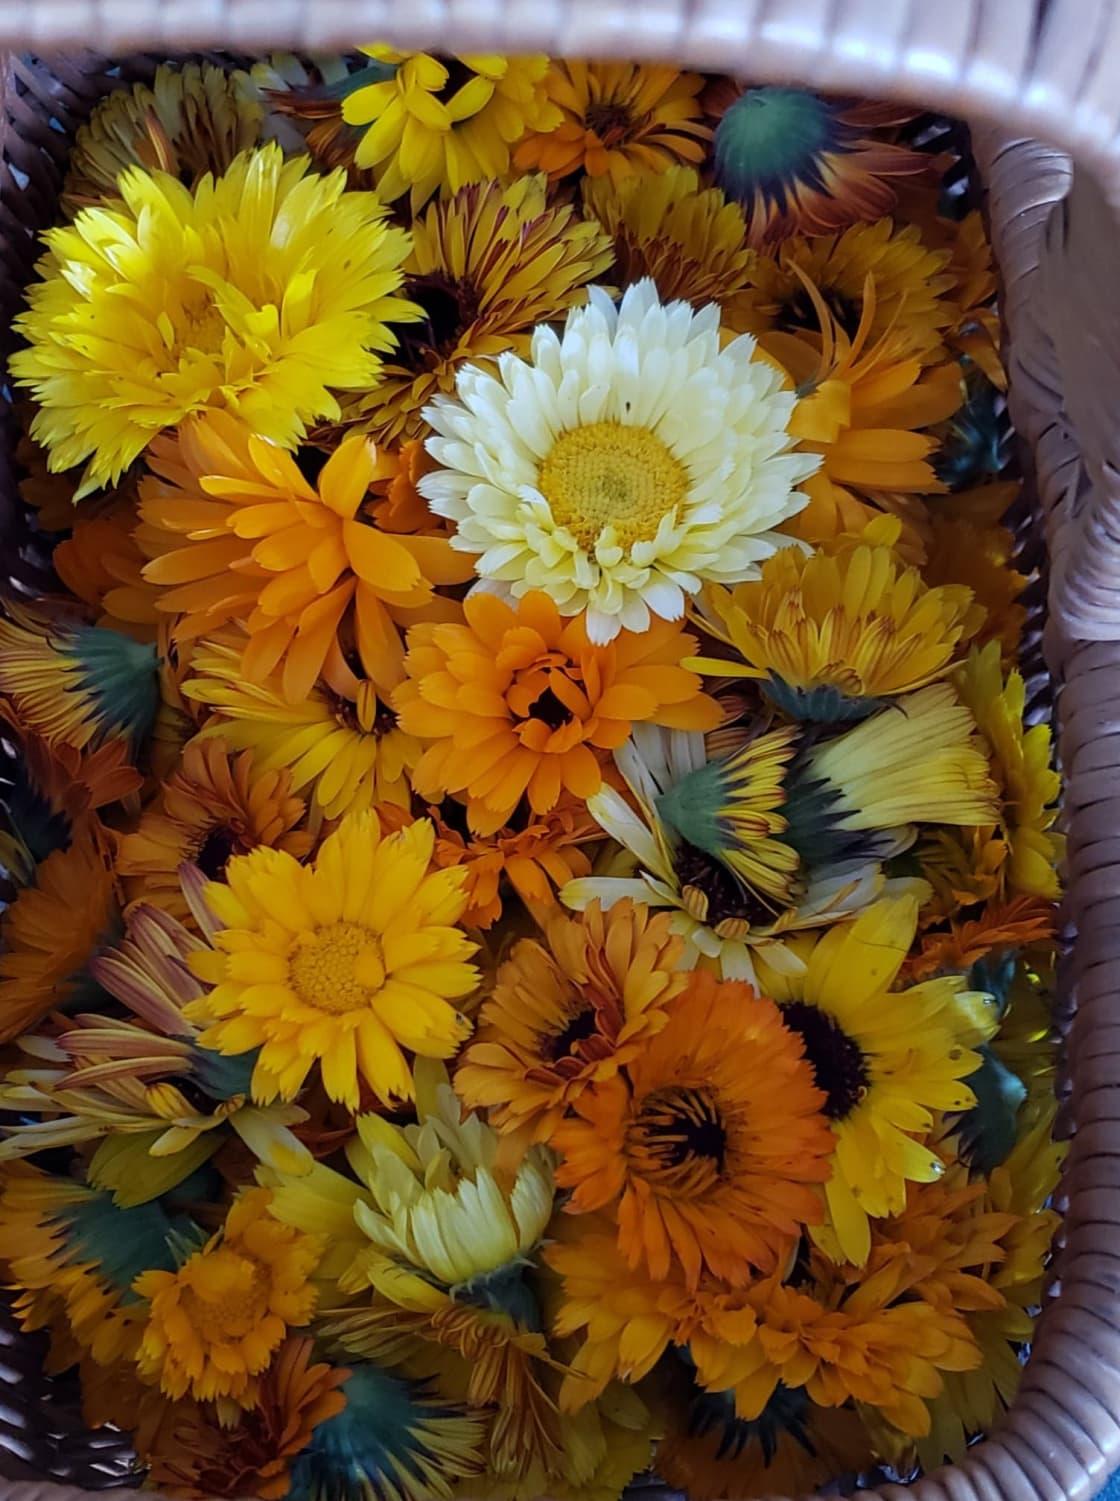 Garden harvested Calendula flowers in July